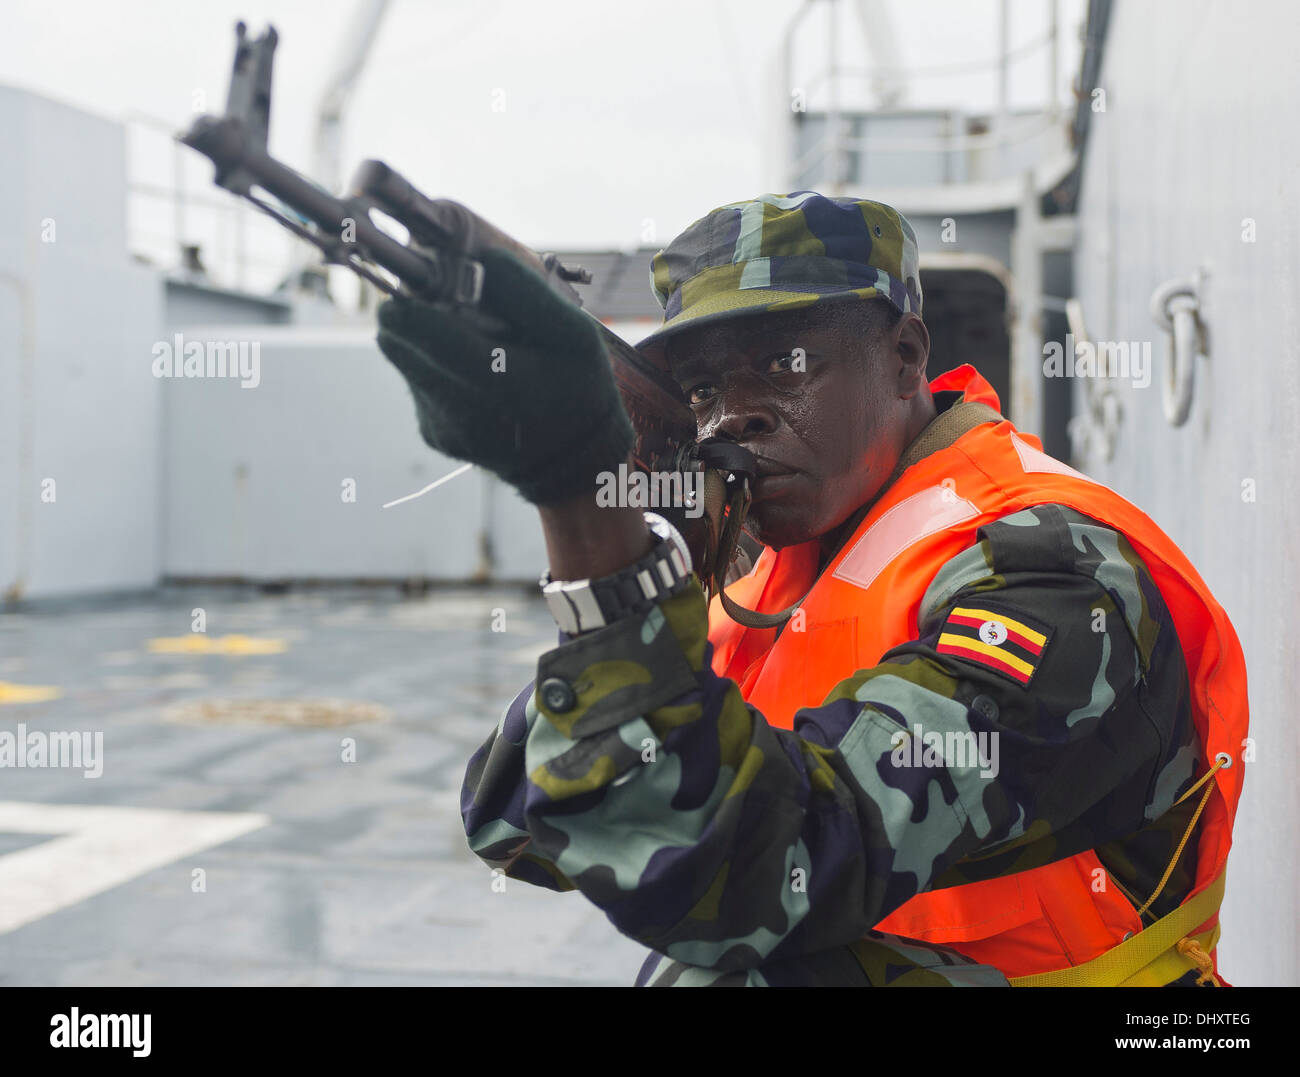 DJIBOUTI, Djibouti (Nov. 14, 2013) - A Uganda People's Defence Force member provides security aboard a target vessel during Exercise Cutlass Express 2013 in the Gulf of Tadjoura near Djibouti. Exercise Cutlass Express 2013 is a multinational maritime exer Stock Photo